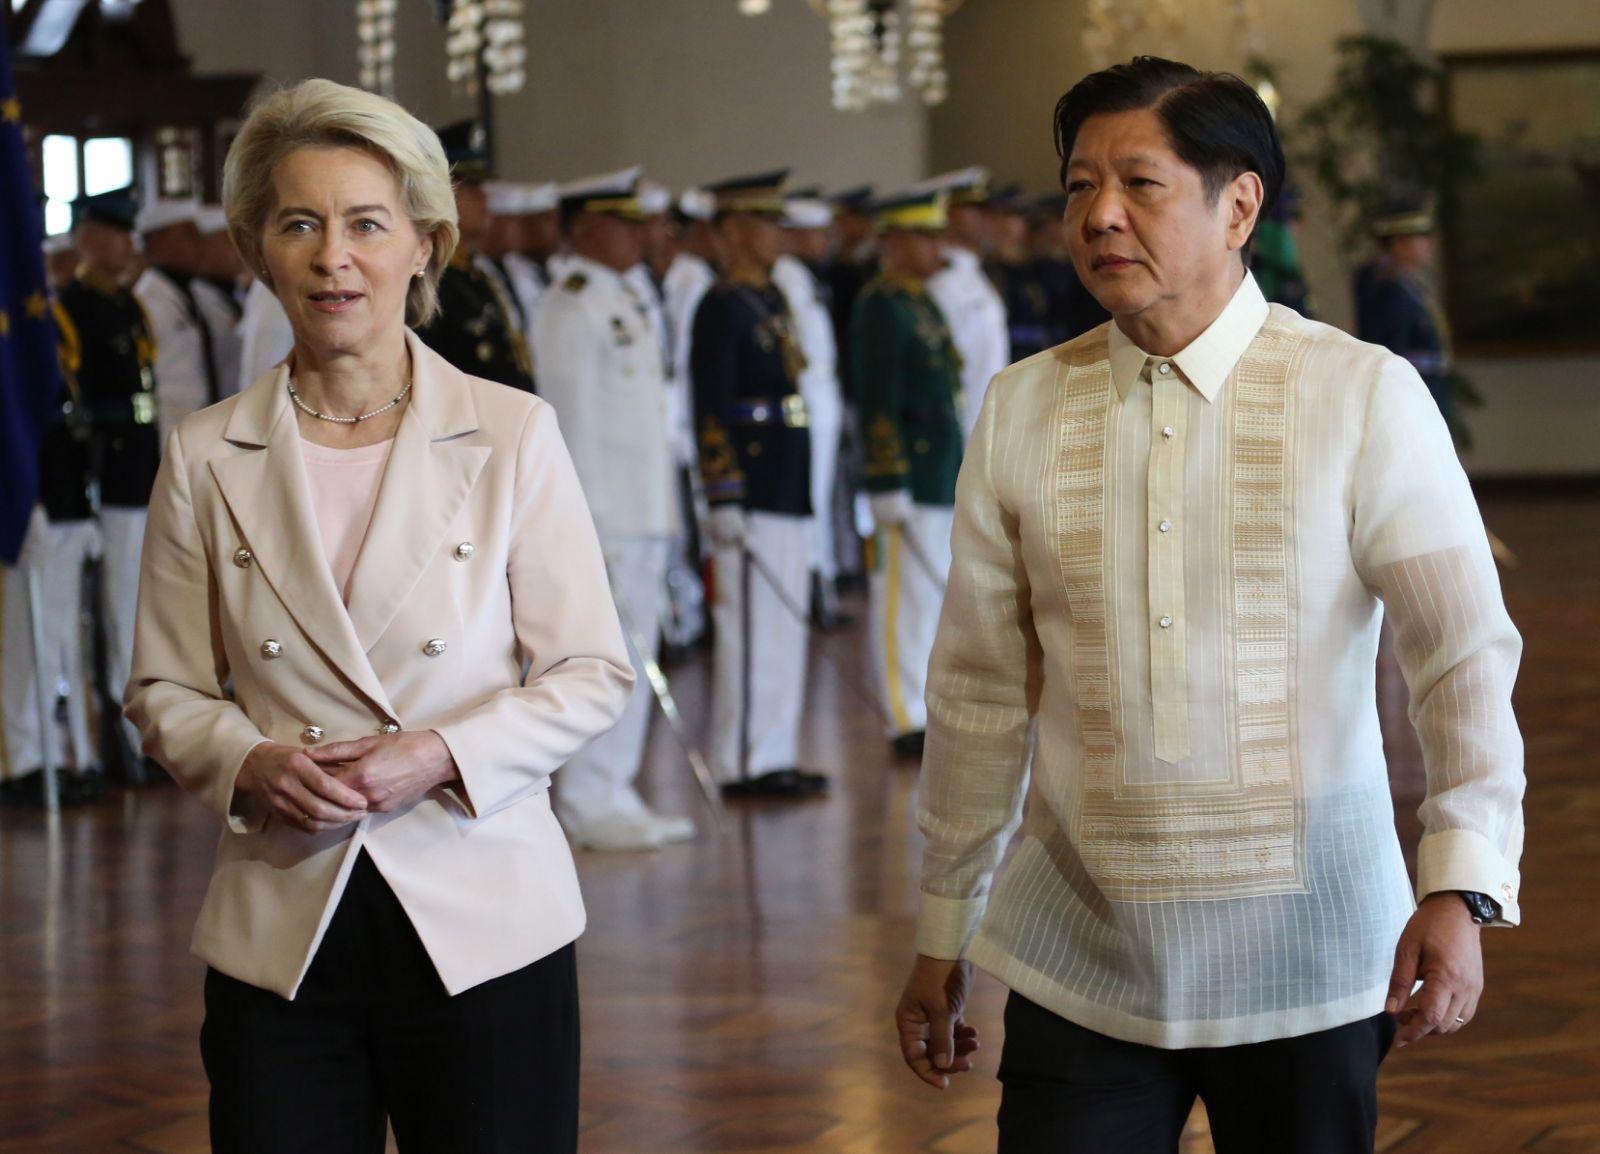 Marcos: EU, PH ‘like-minded’ on rule of law, human rights